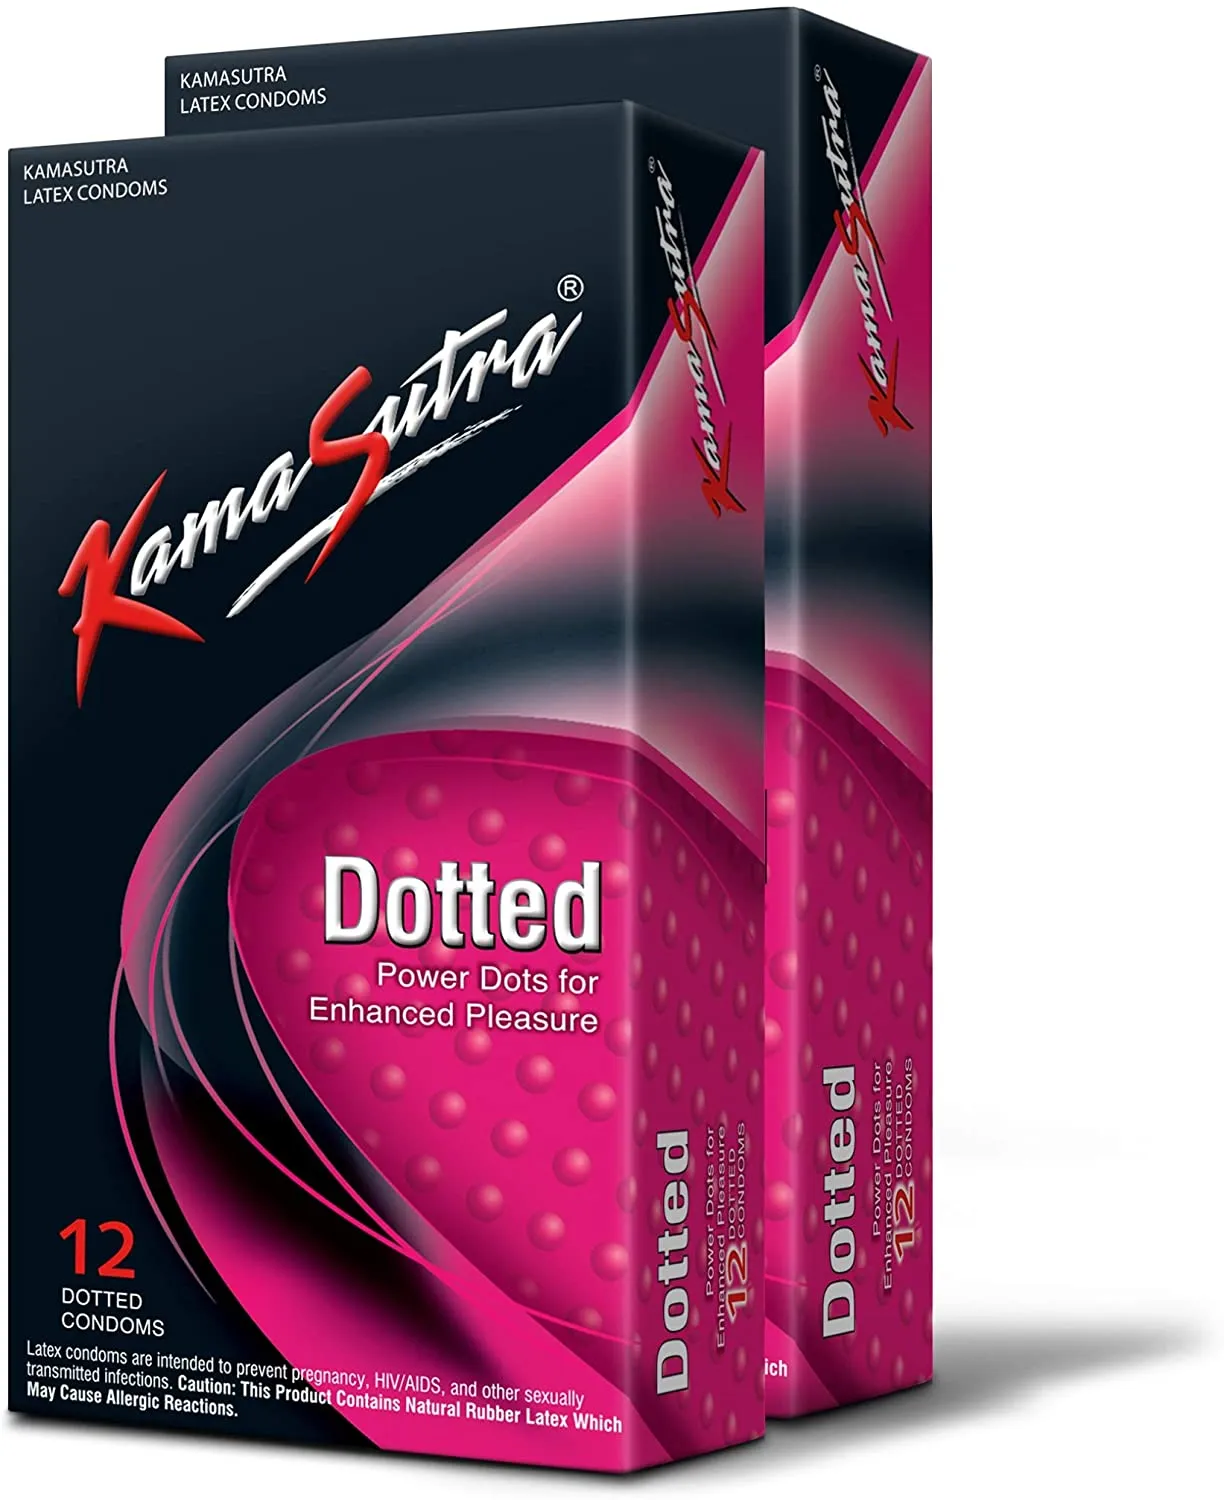 KAMA SUTRA CONDOM DOTTED